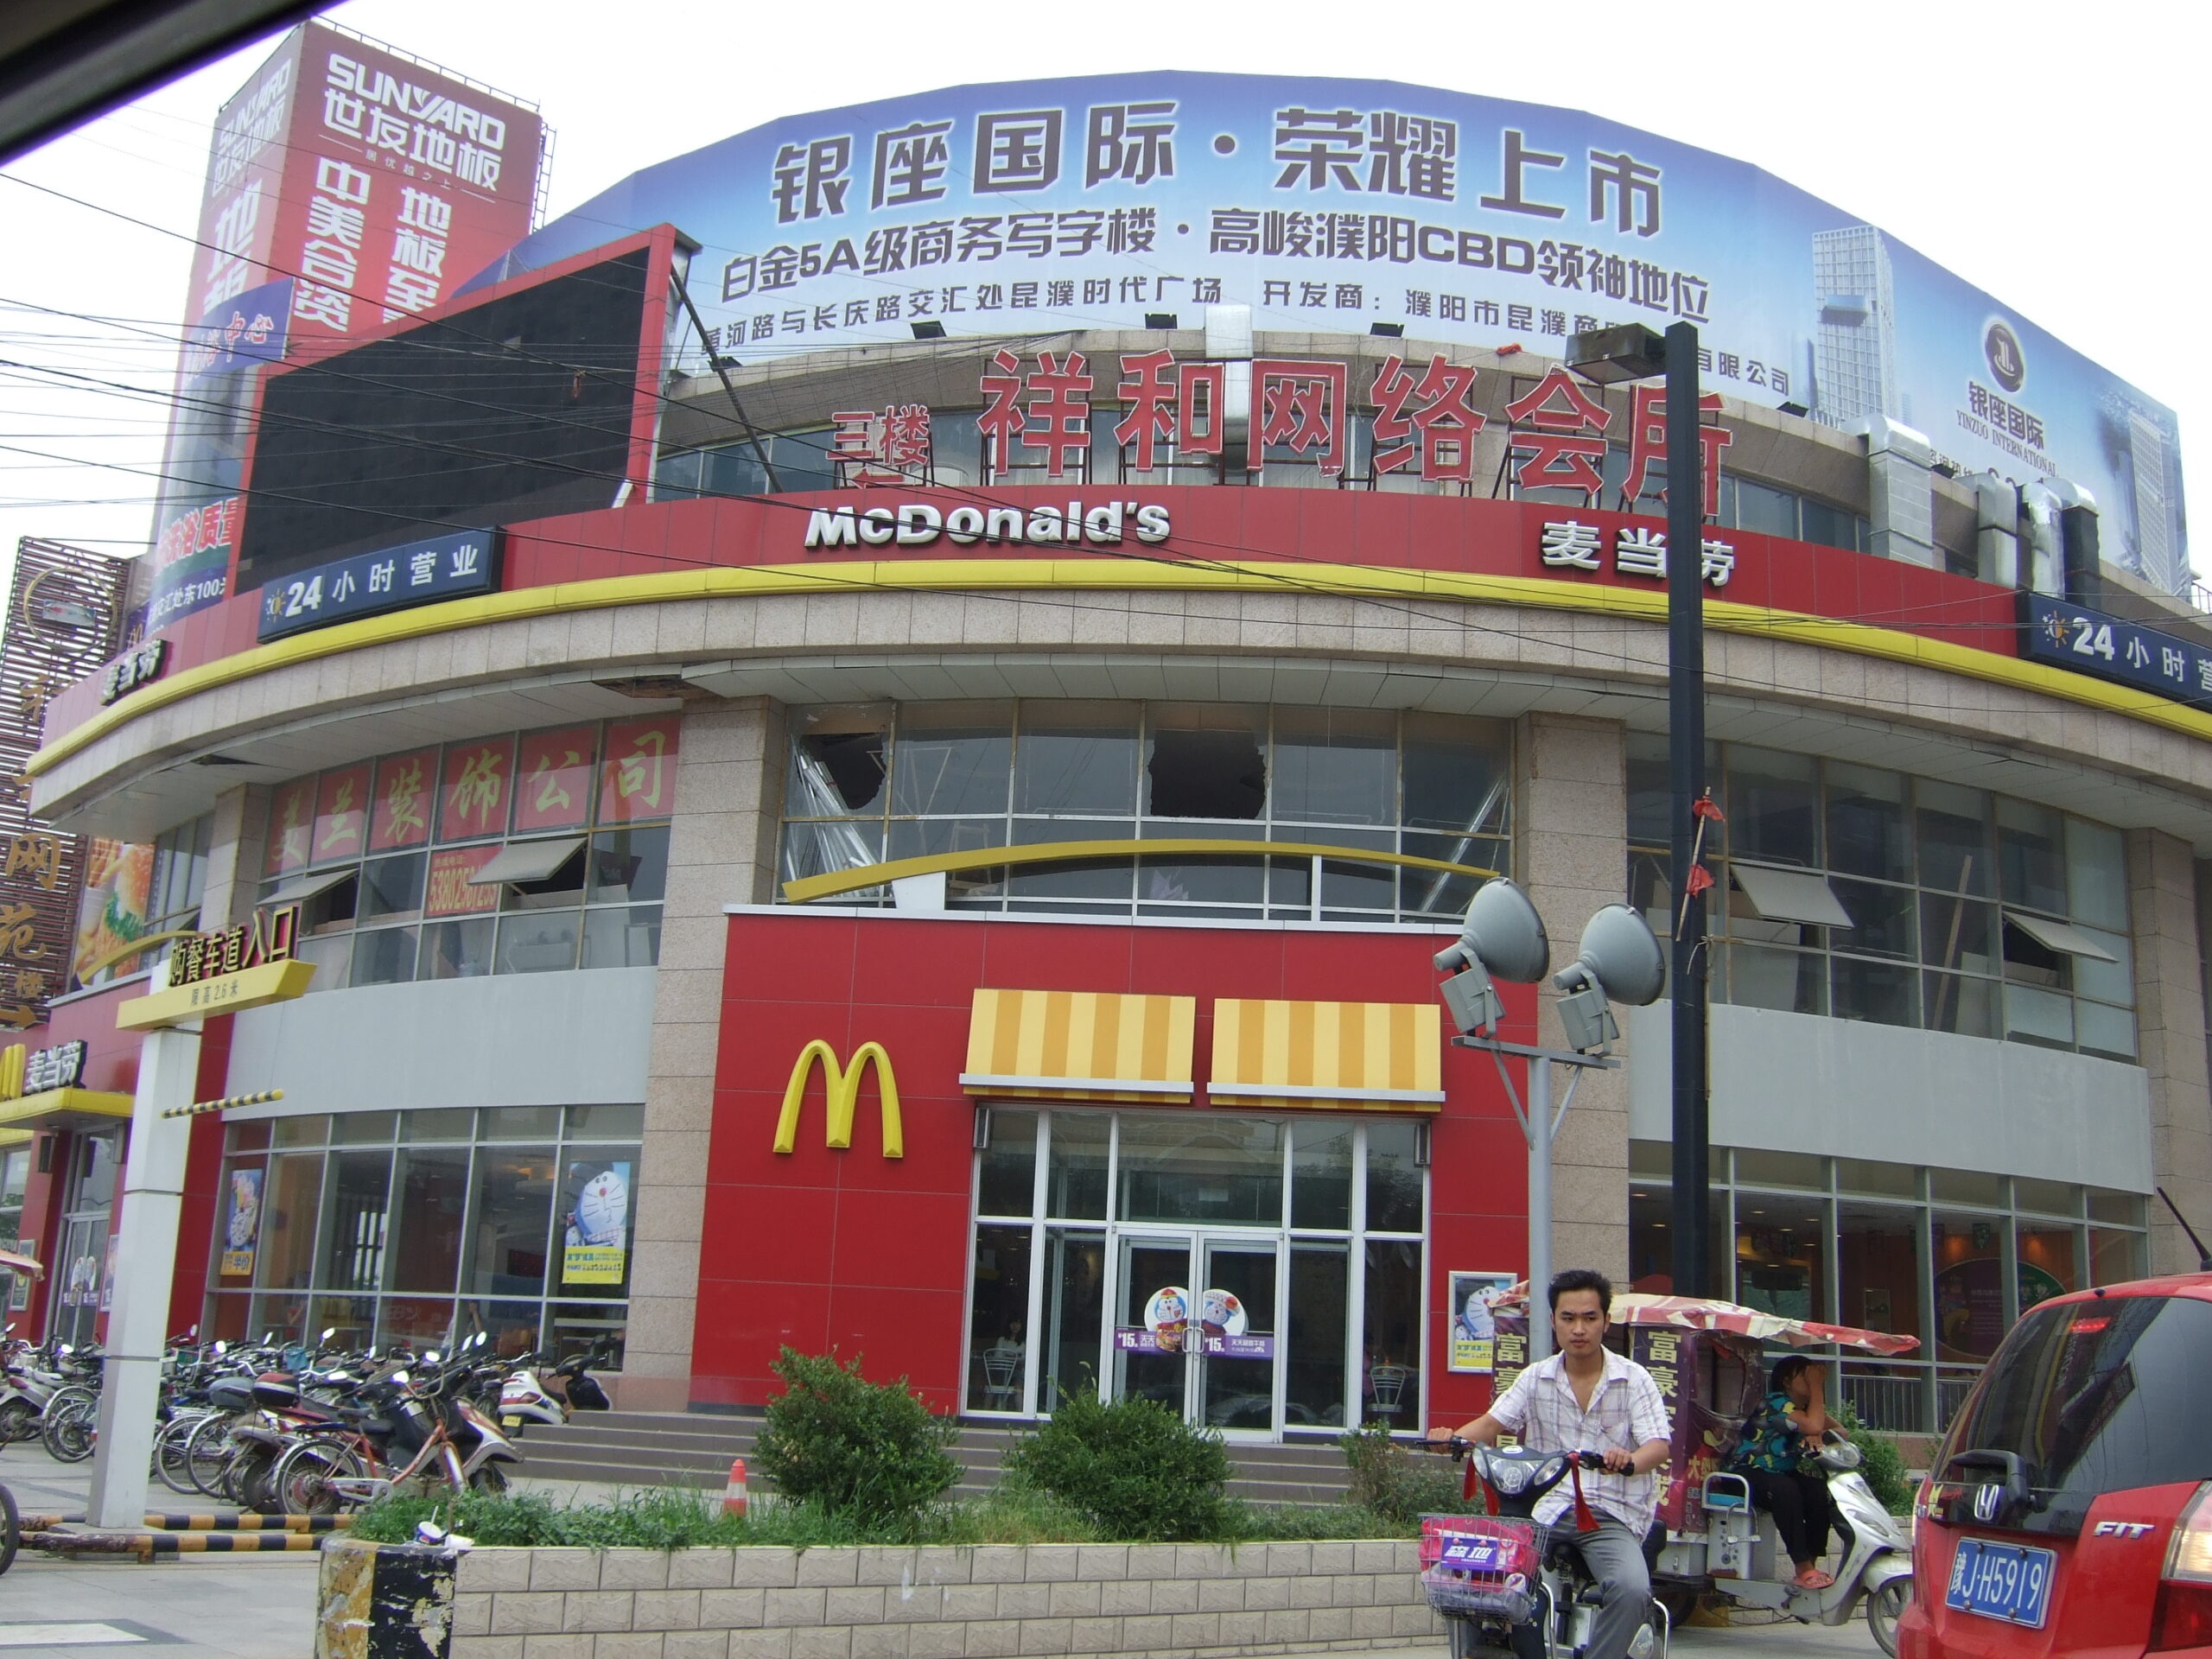 McDonald’s and Starbucks in Shenzhen began to charge for disposable tableware, causing controversy